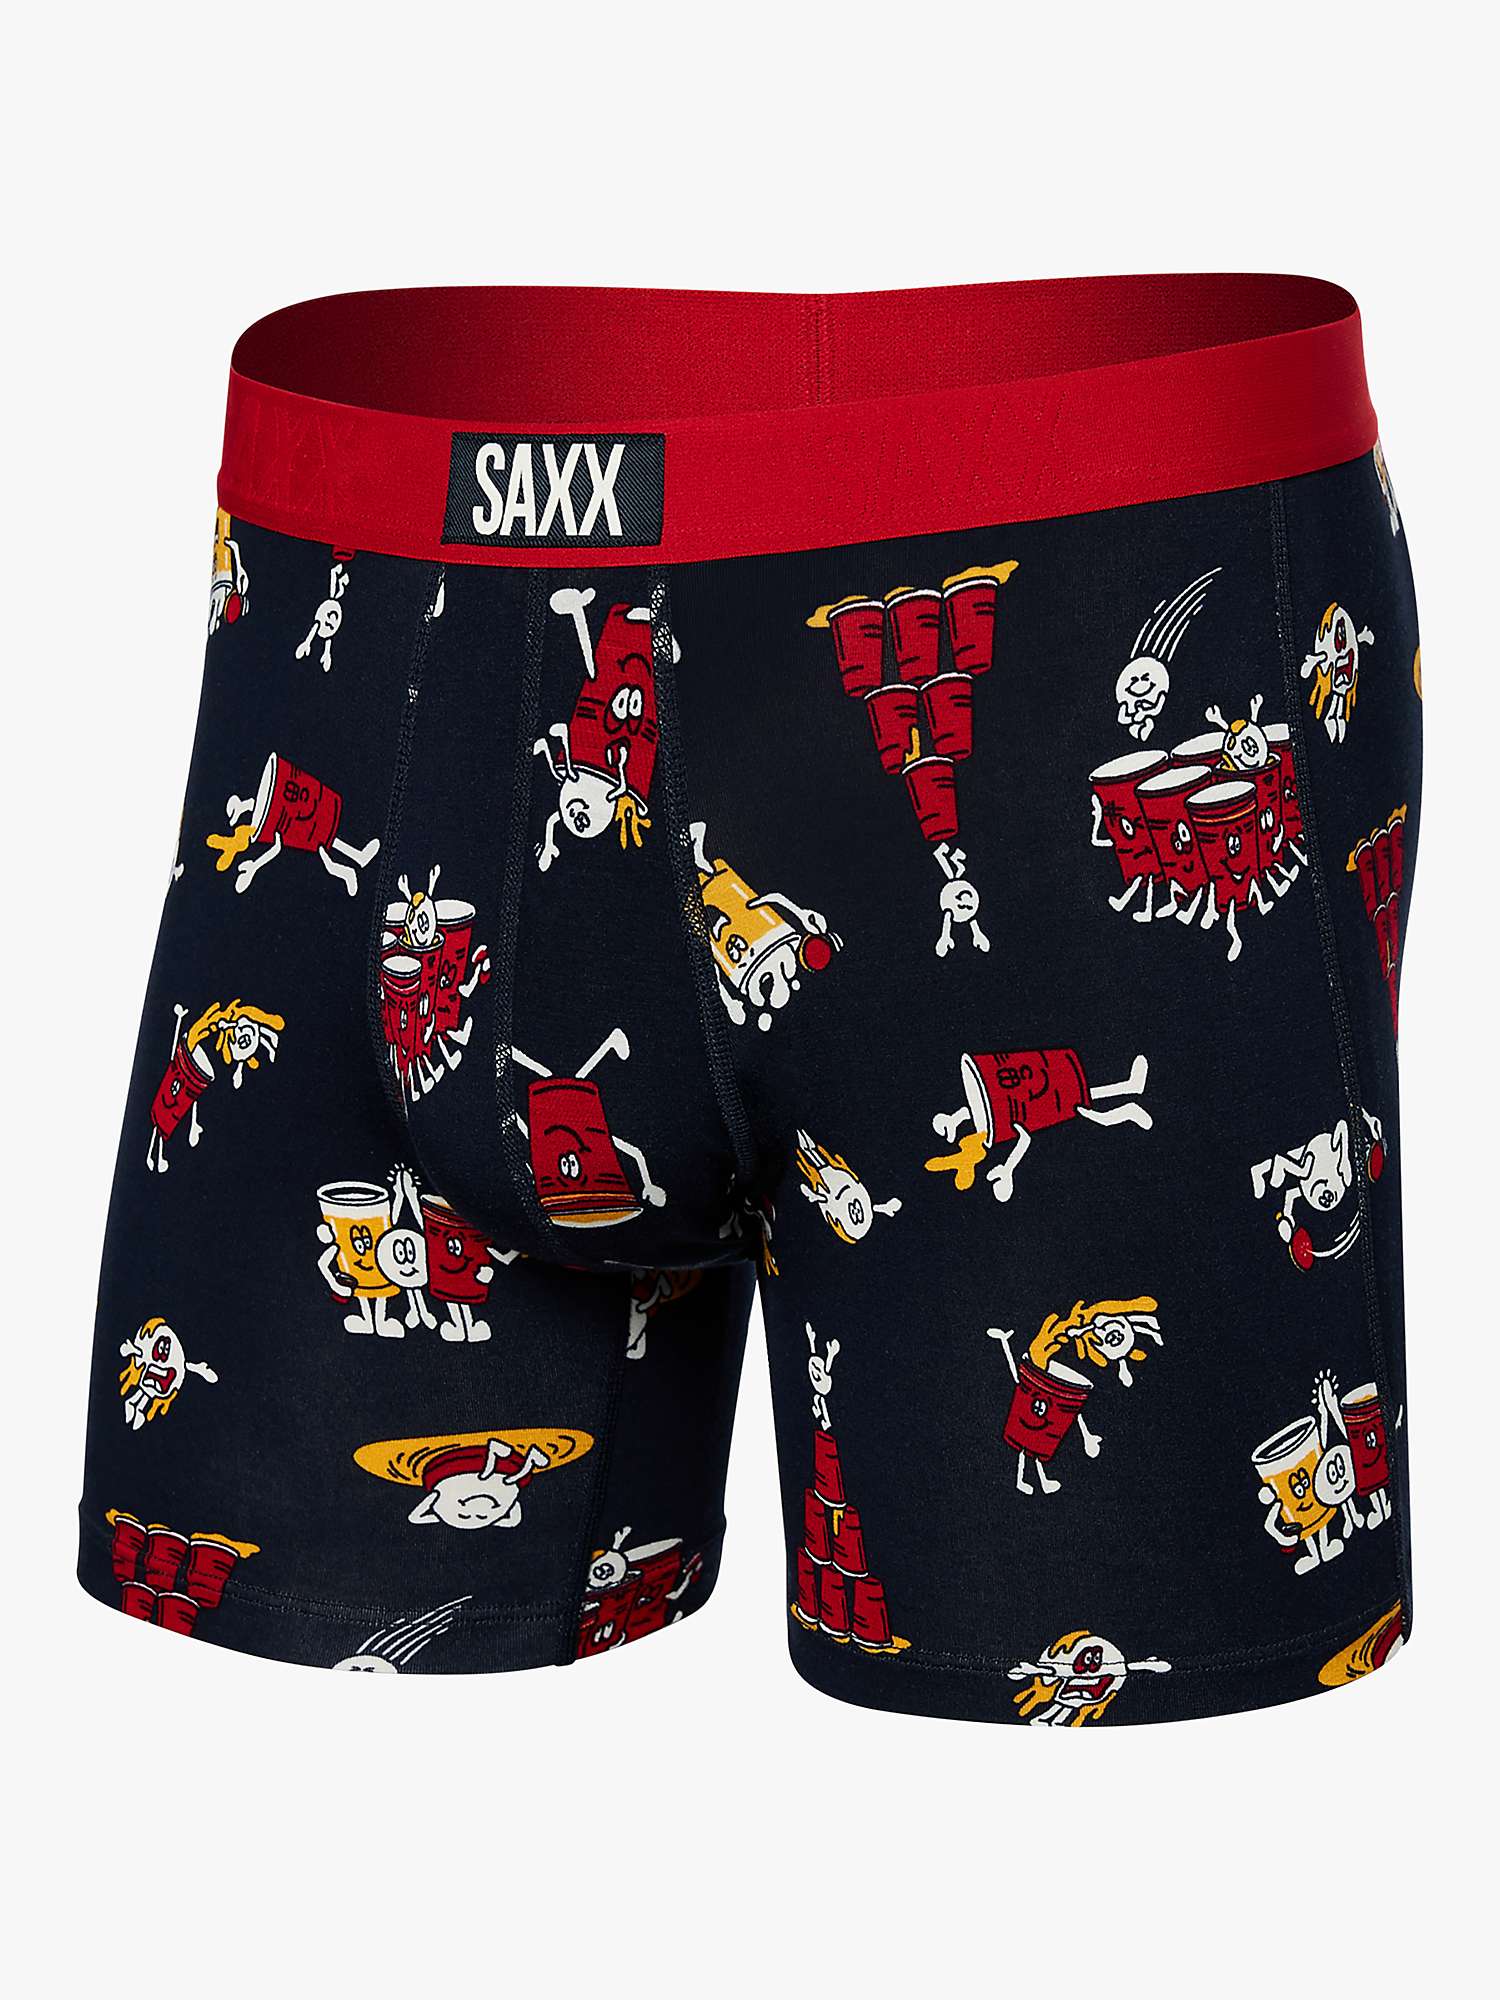 Buy SAXX Slim Fit Vibe Party Trunks, Multi Online at johnlewis.com